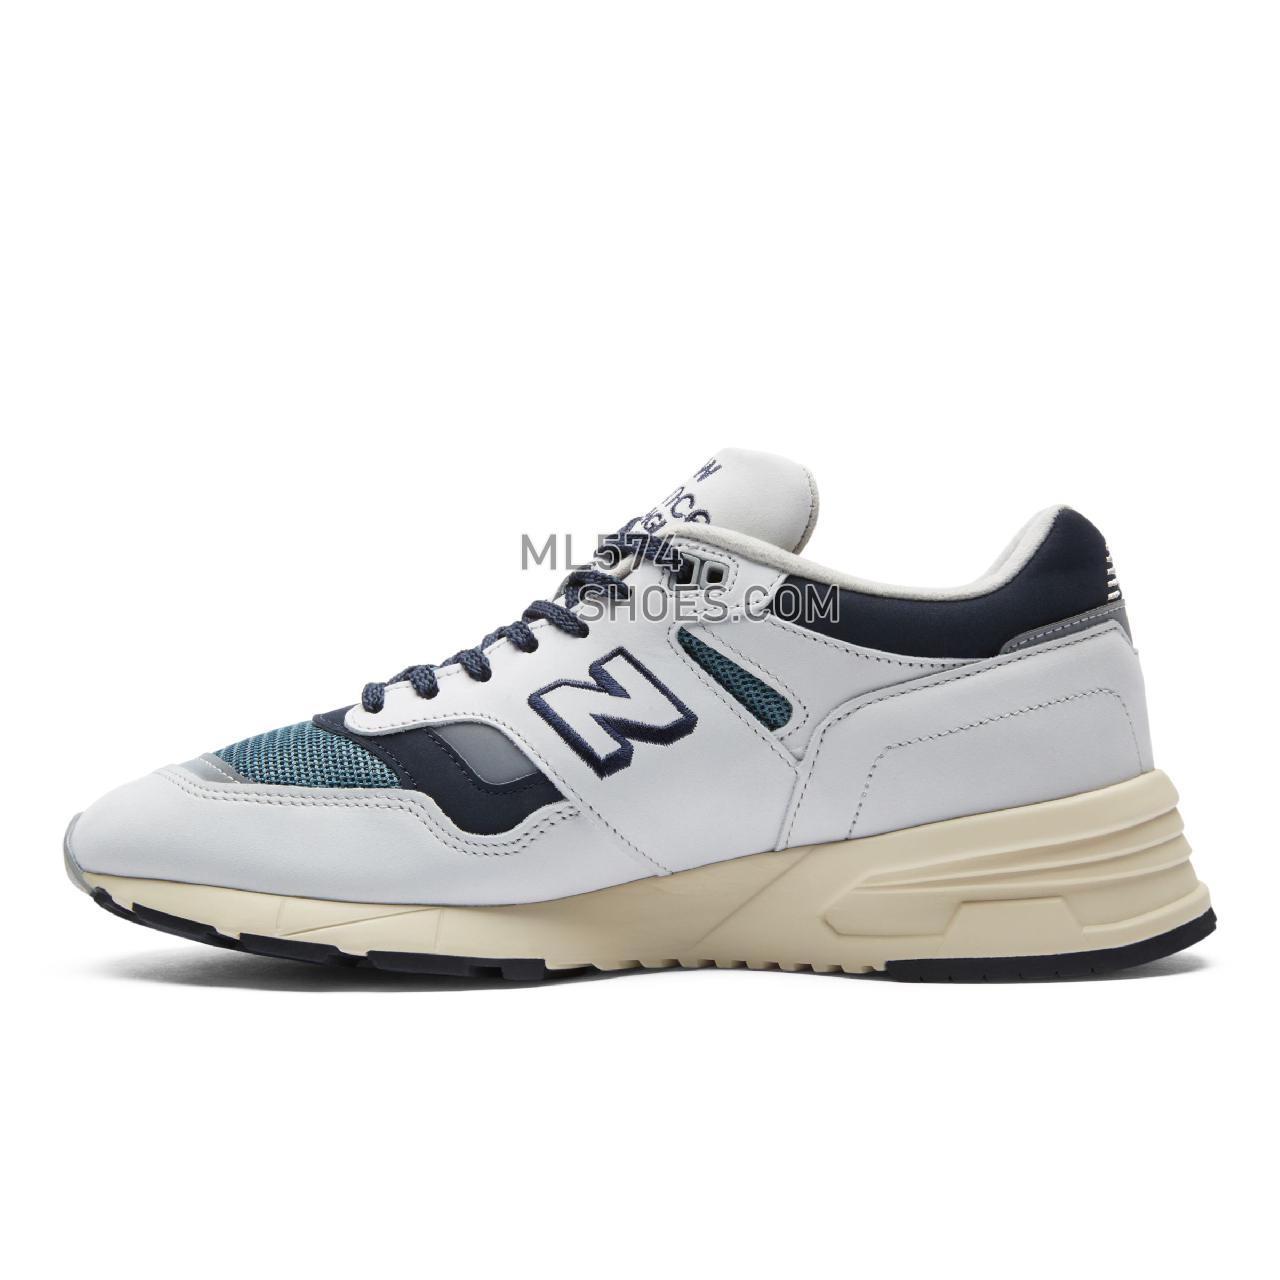 New Balance Made in UK 1530 - Men's 1530 Made in UK Classic M1530-RE - Grey with Navy and Petrol - M1530OGG